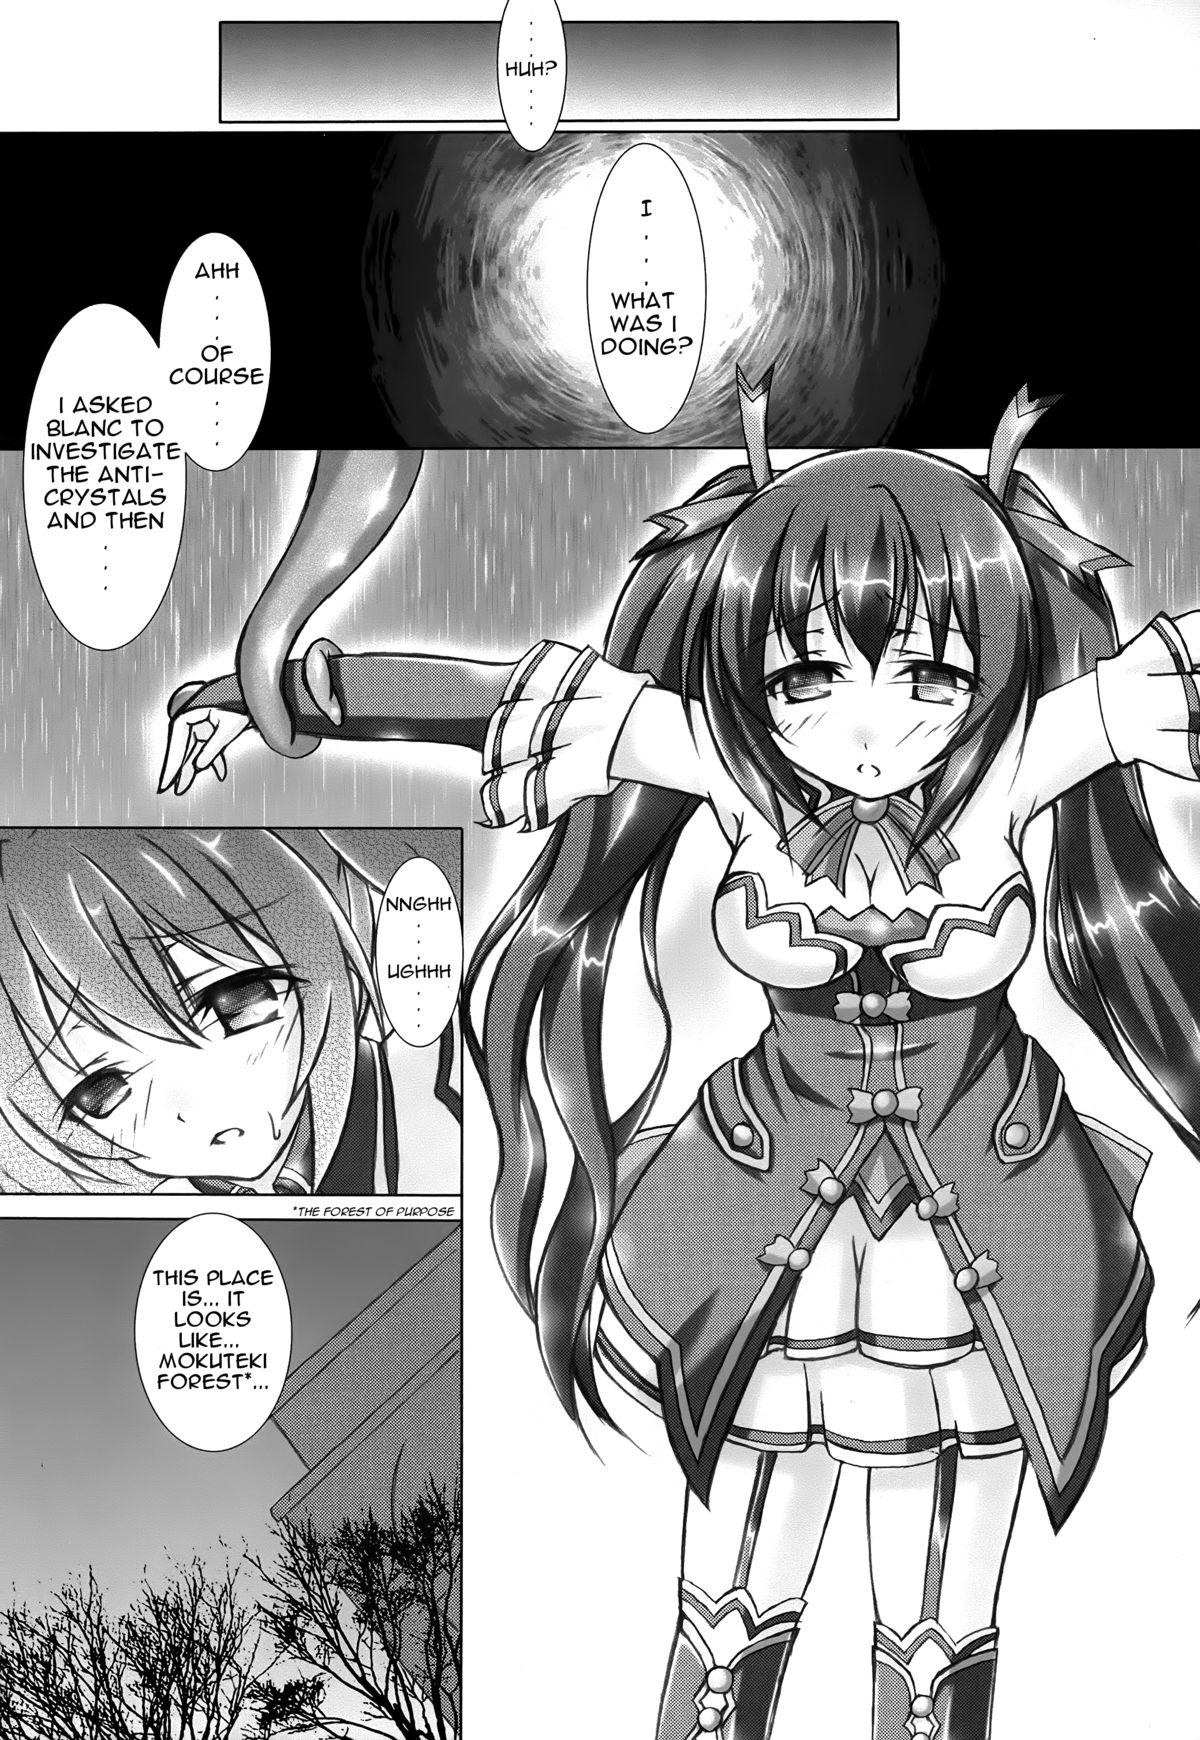 Celeb Tentacle Syndrome 2 - Hyperdimension neptunia Webcamshow - Page 4